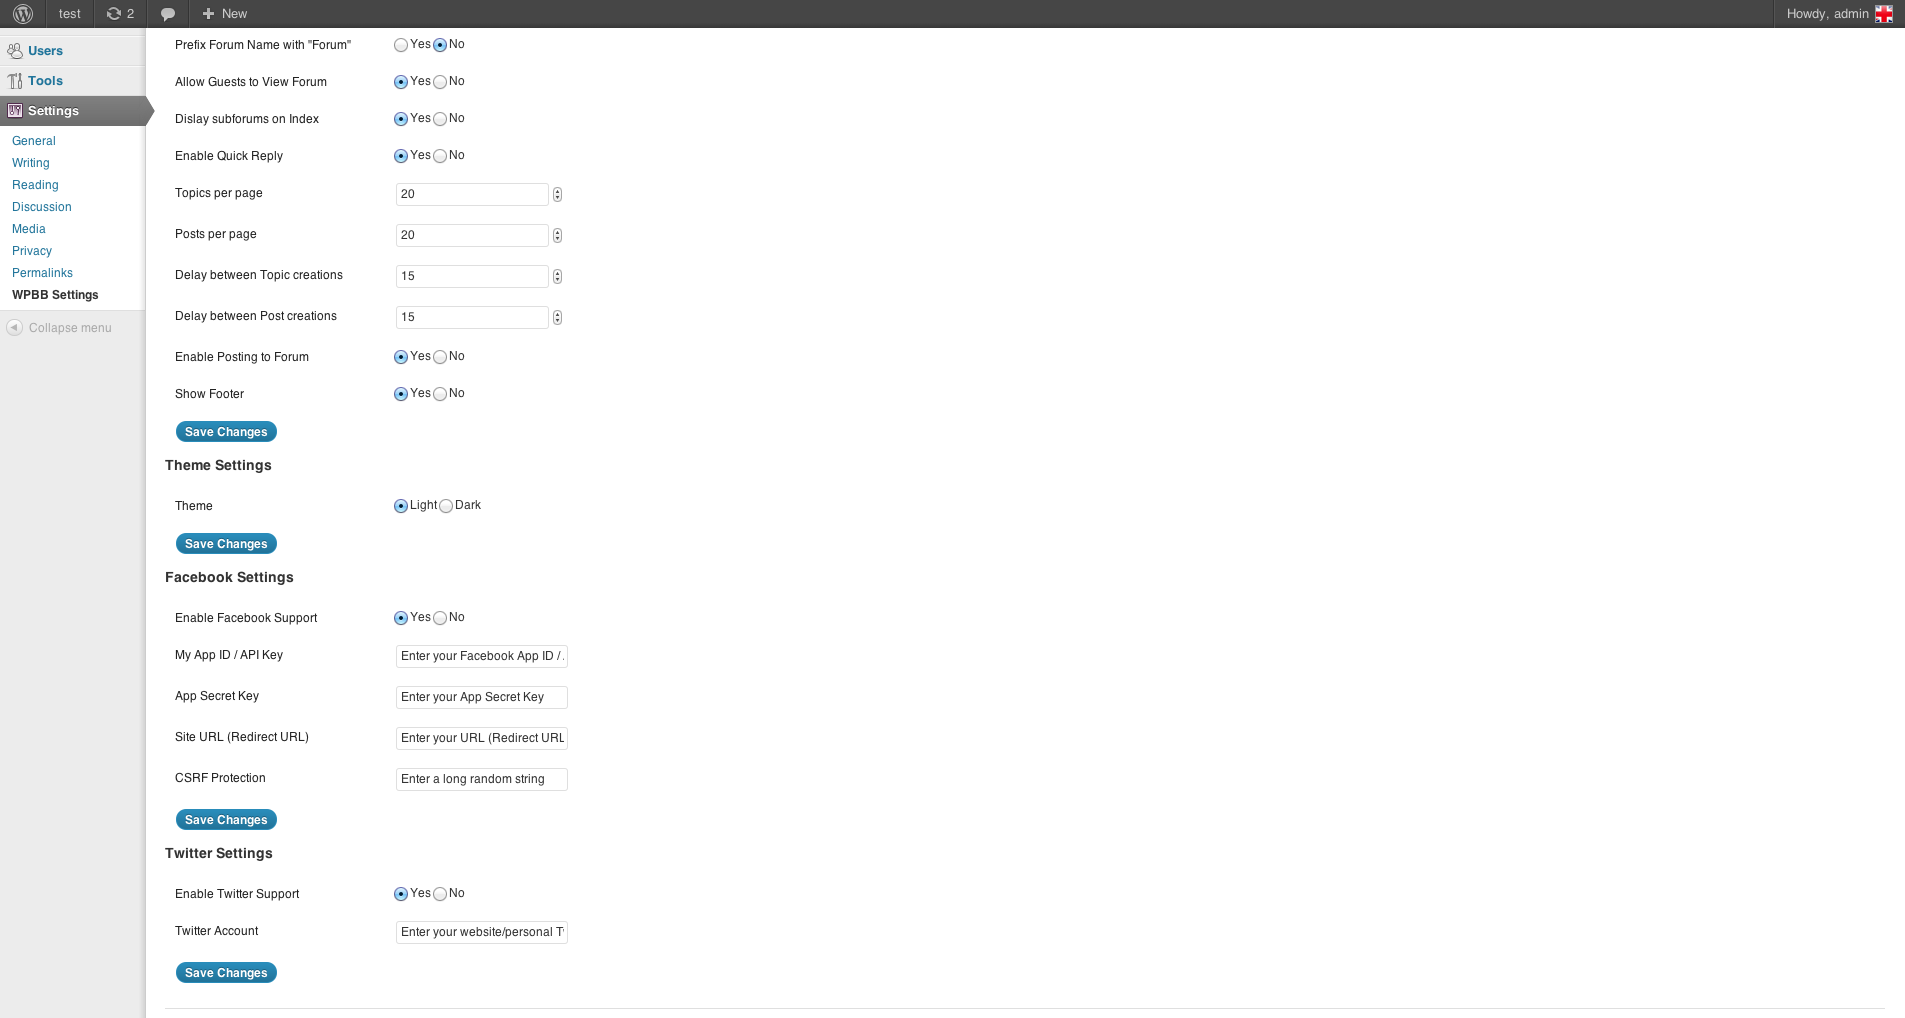 WPBB Settings (some aren't viewable in the screenshot)